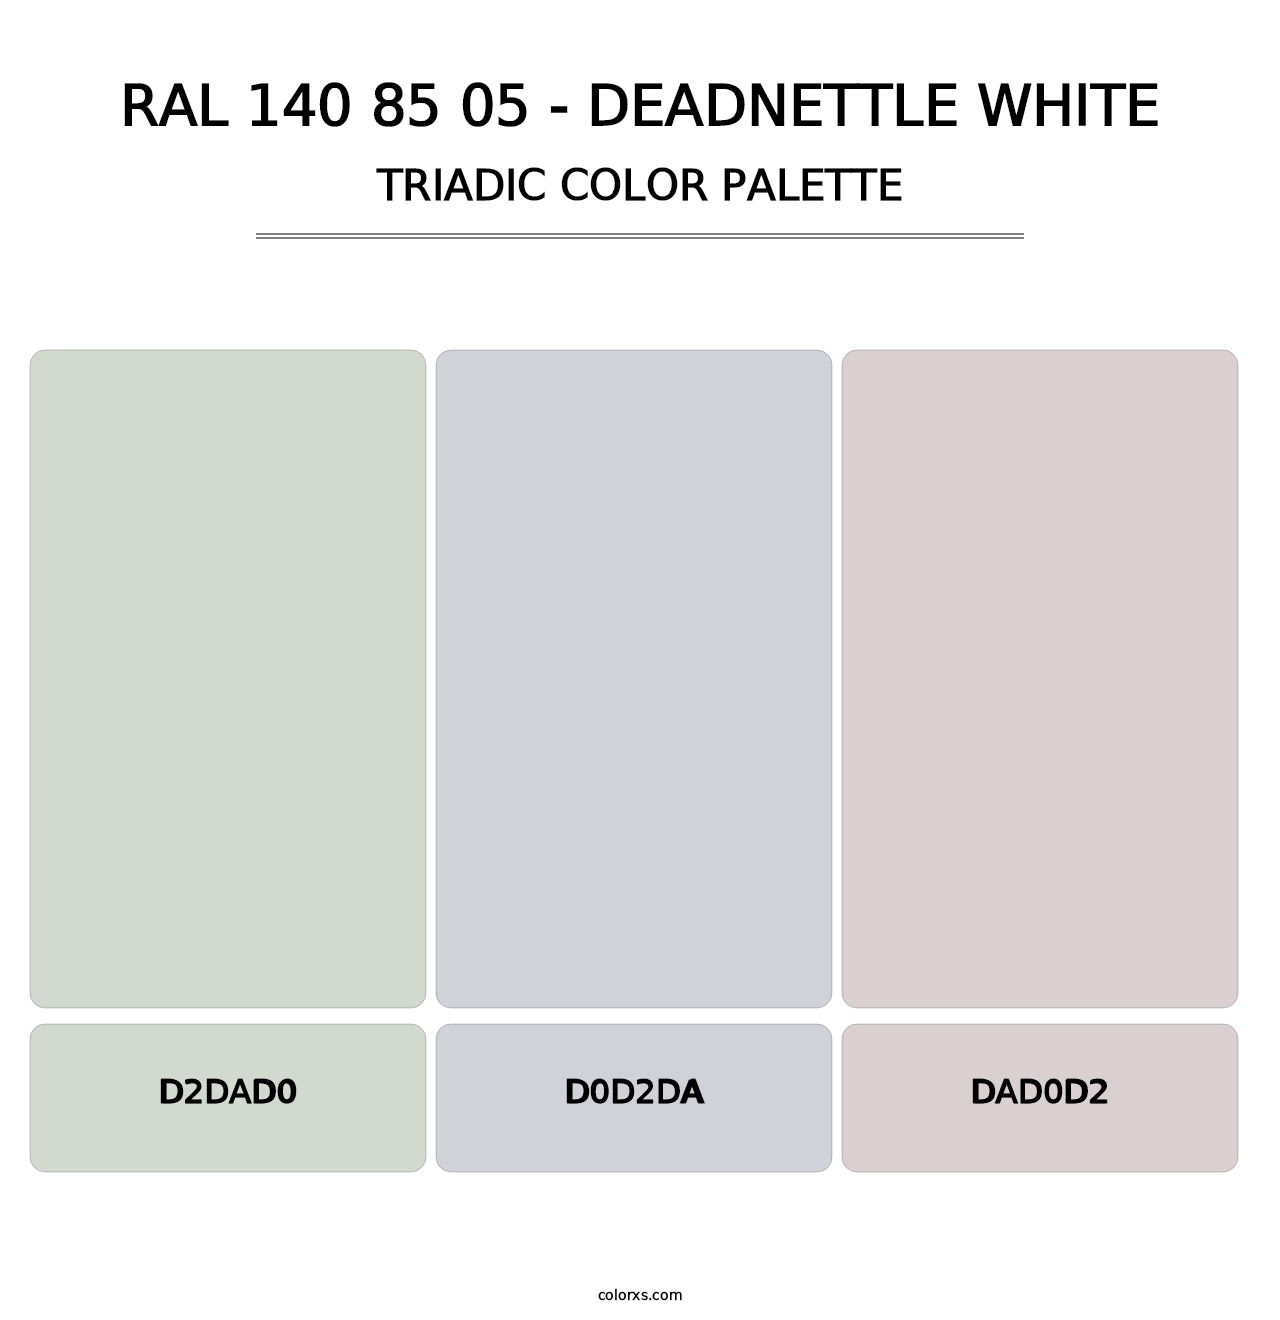 RAL 140 85 05 - Deadnettle White - Triadic Color Palette